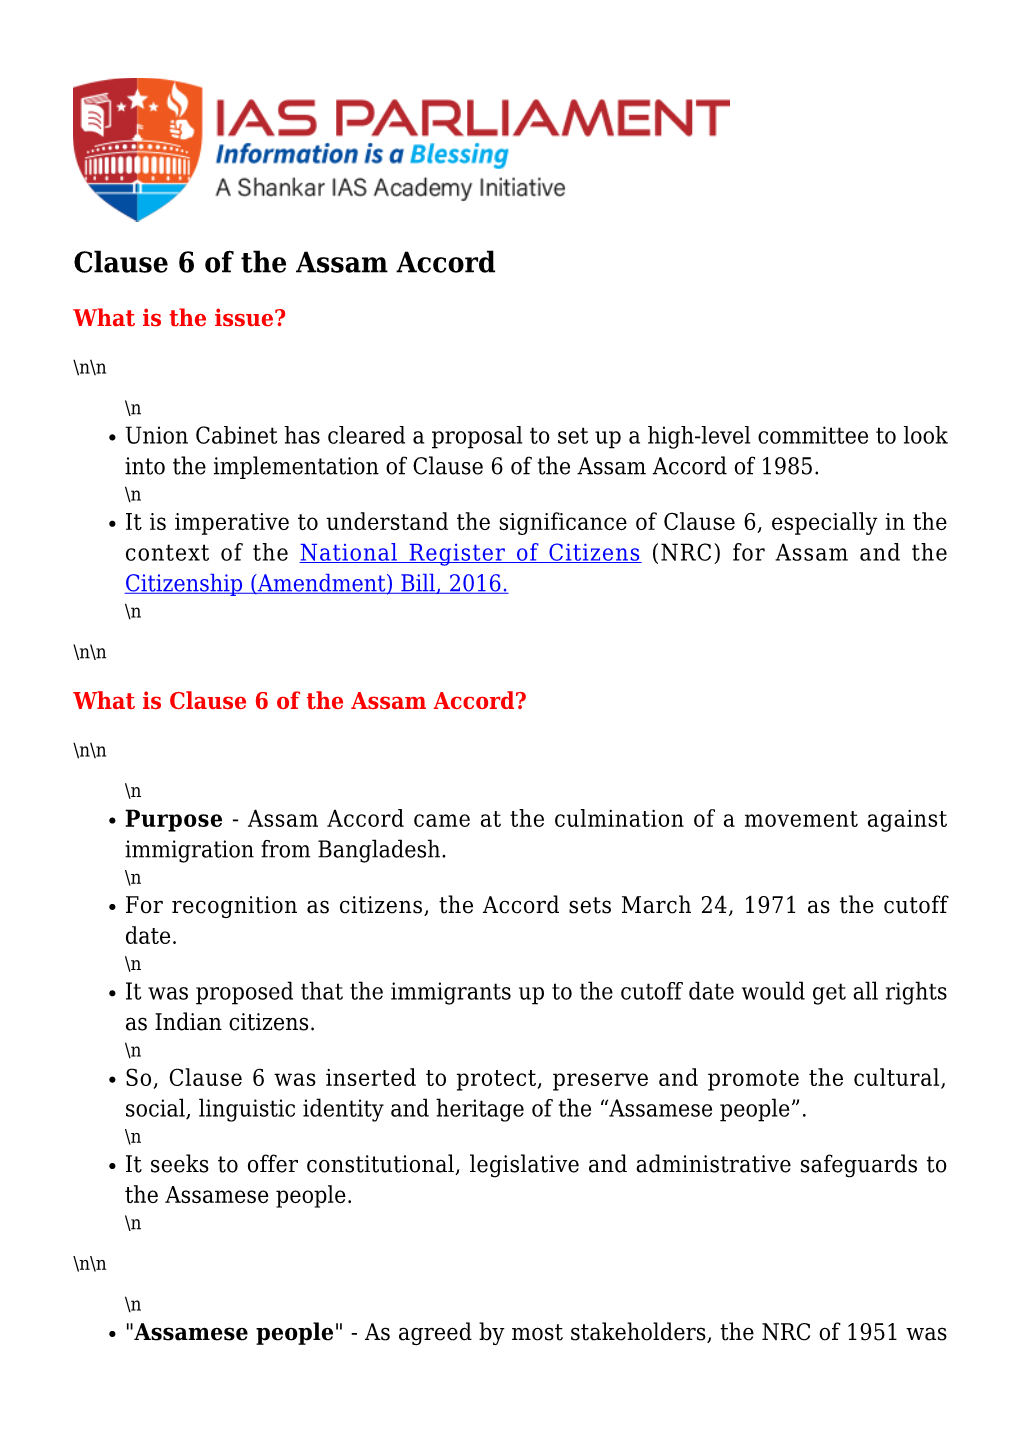 Clause 6 of the Assam Accord